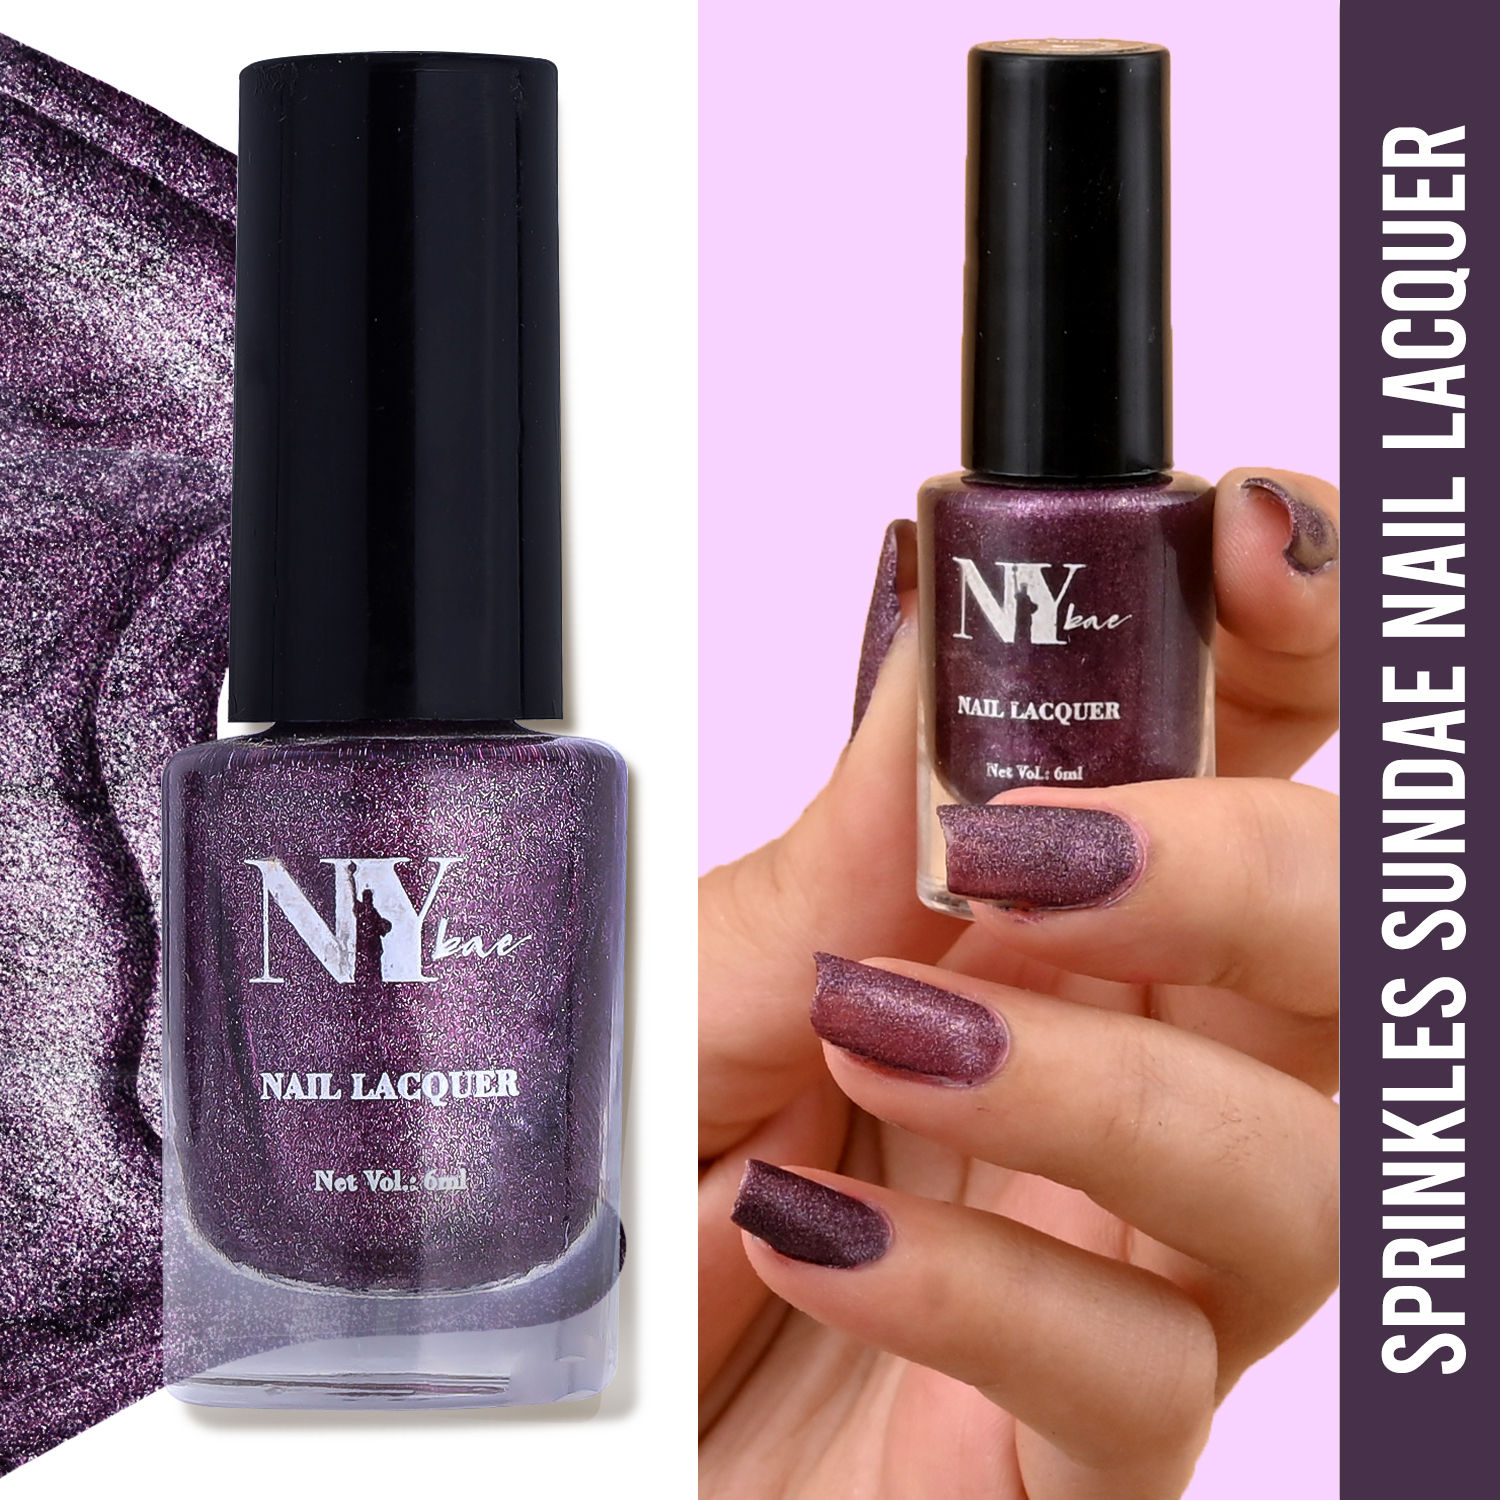 Buy NY Bae Sugar Effect Sprinkles Sundae Nail Lacquer - Figs Sprinkles Sundae 4 (6 ml) | Mauve Purple | Sugar Effect | Highly Pigmented | Chip Resistant | Non-Yellowing | Streak-free Application | Cruelty Free | Non-Toxic - Purplle